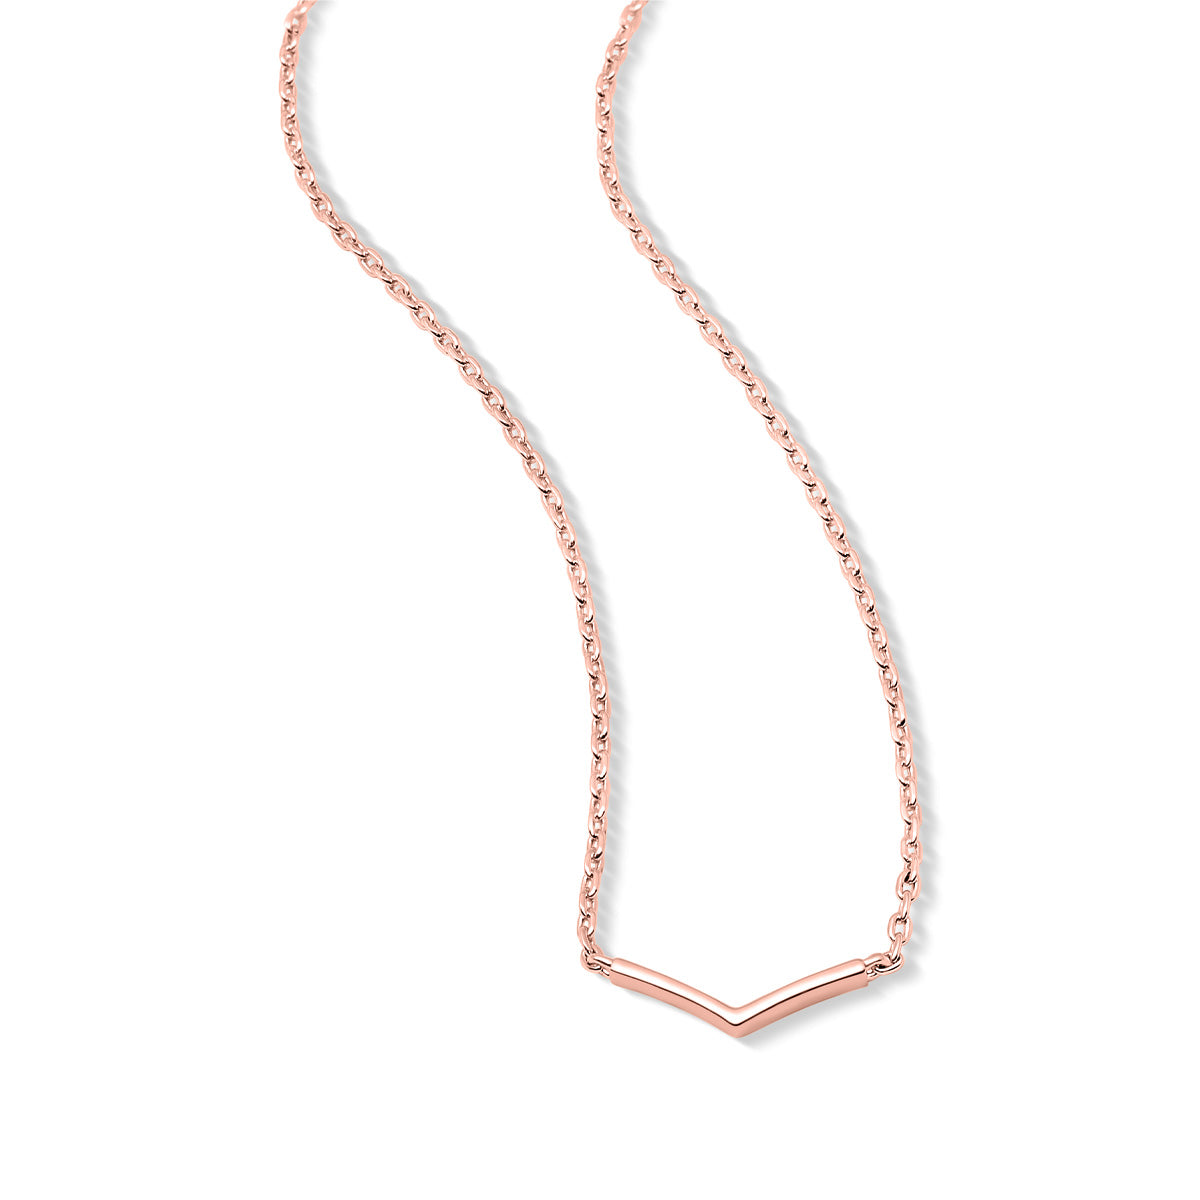 Cute rose gold v shaped chain necklace